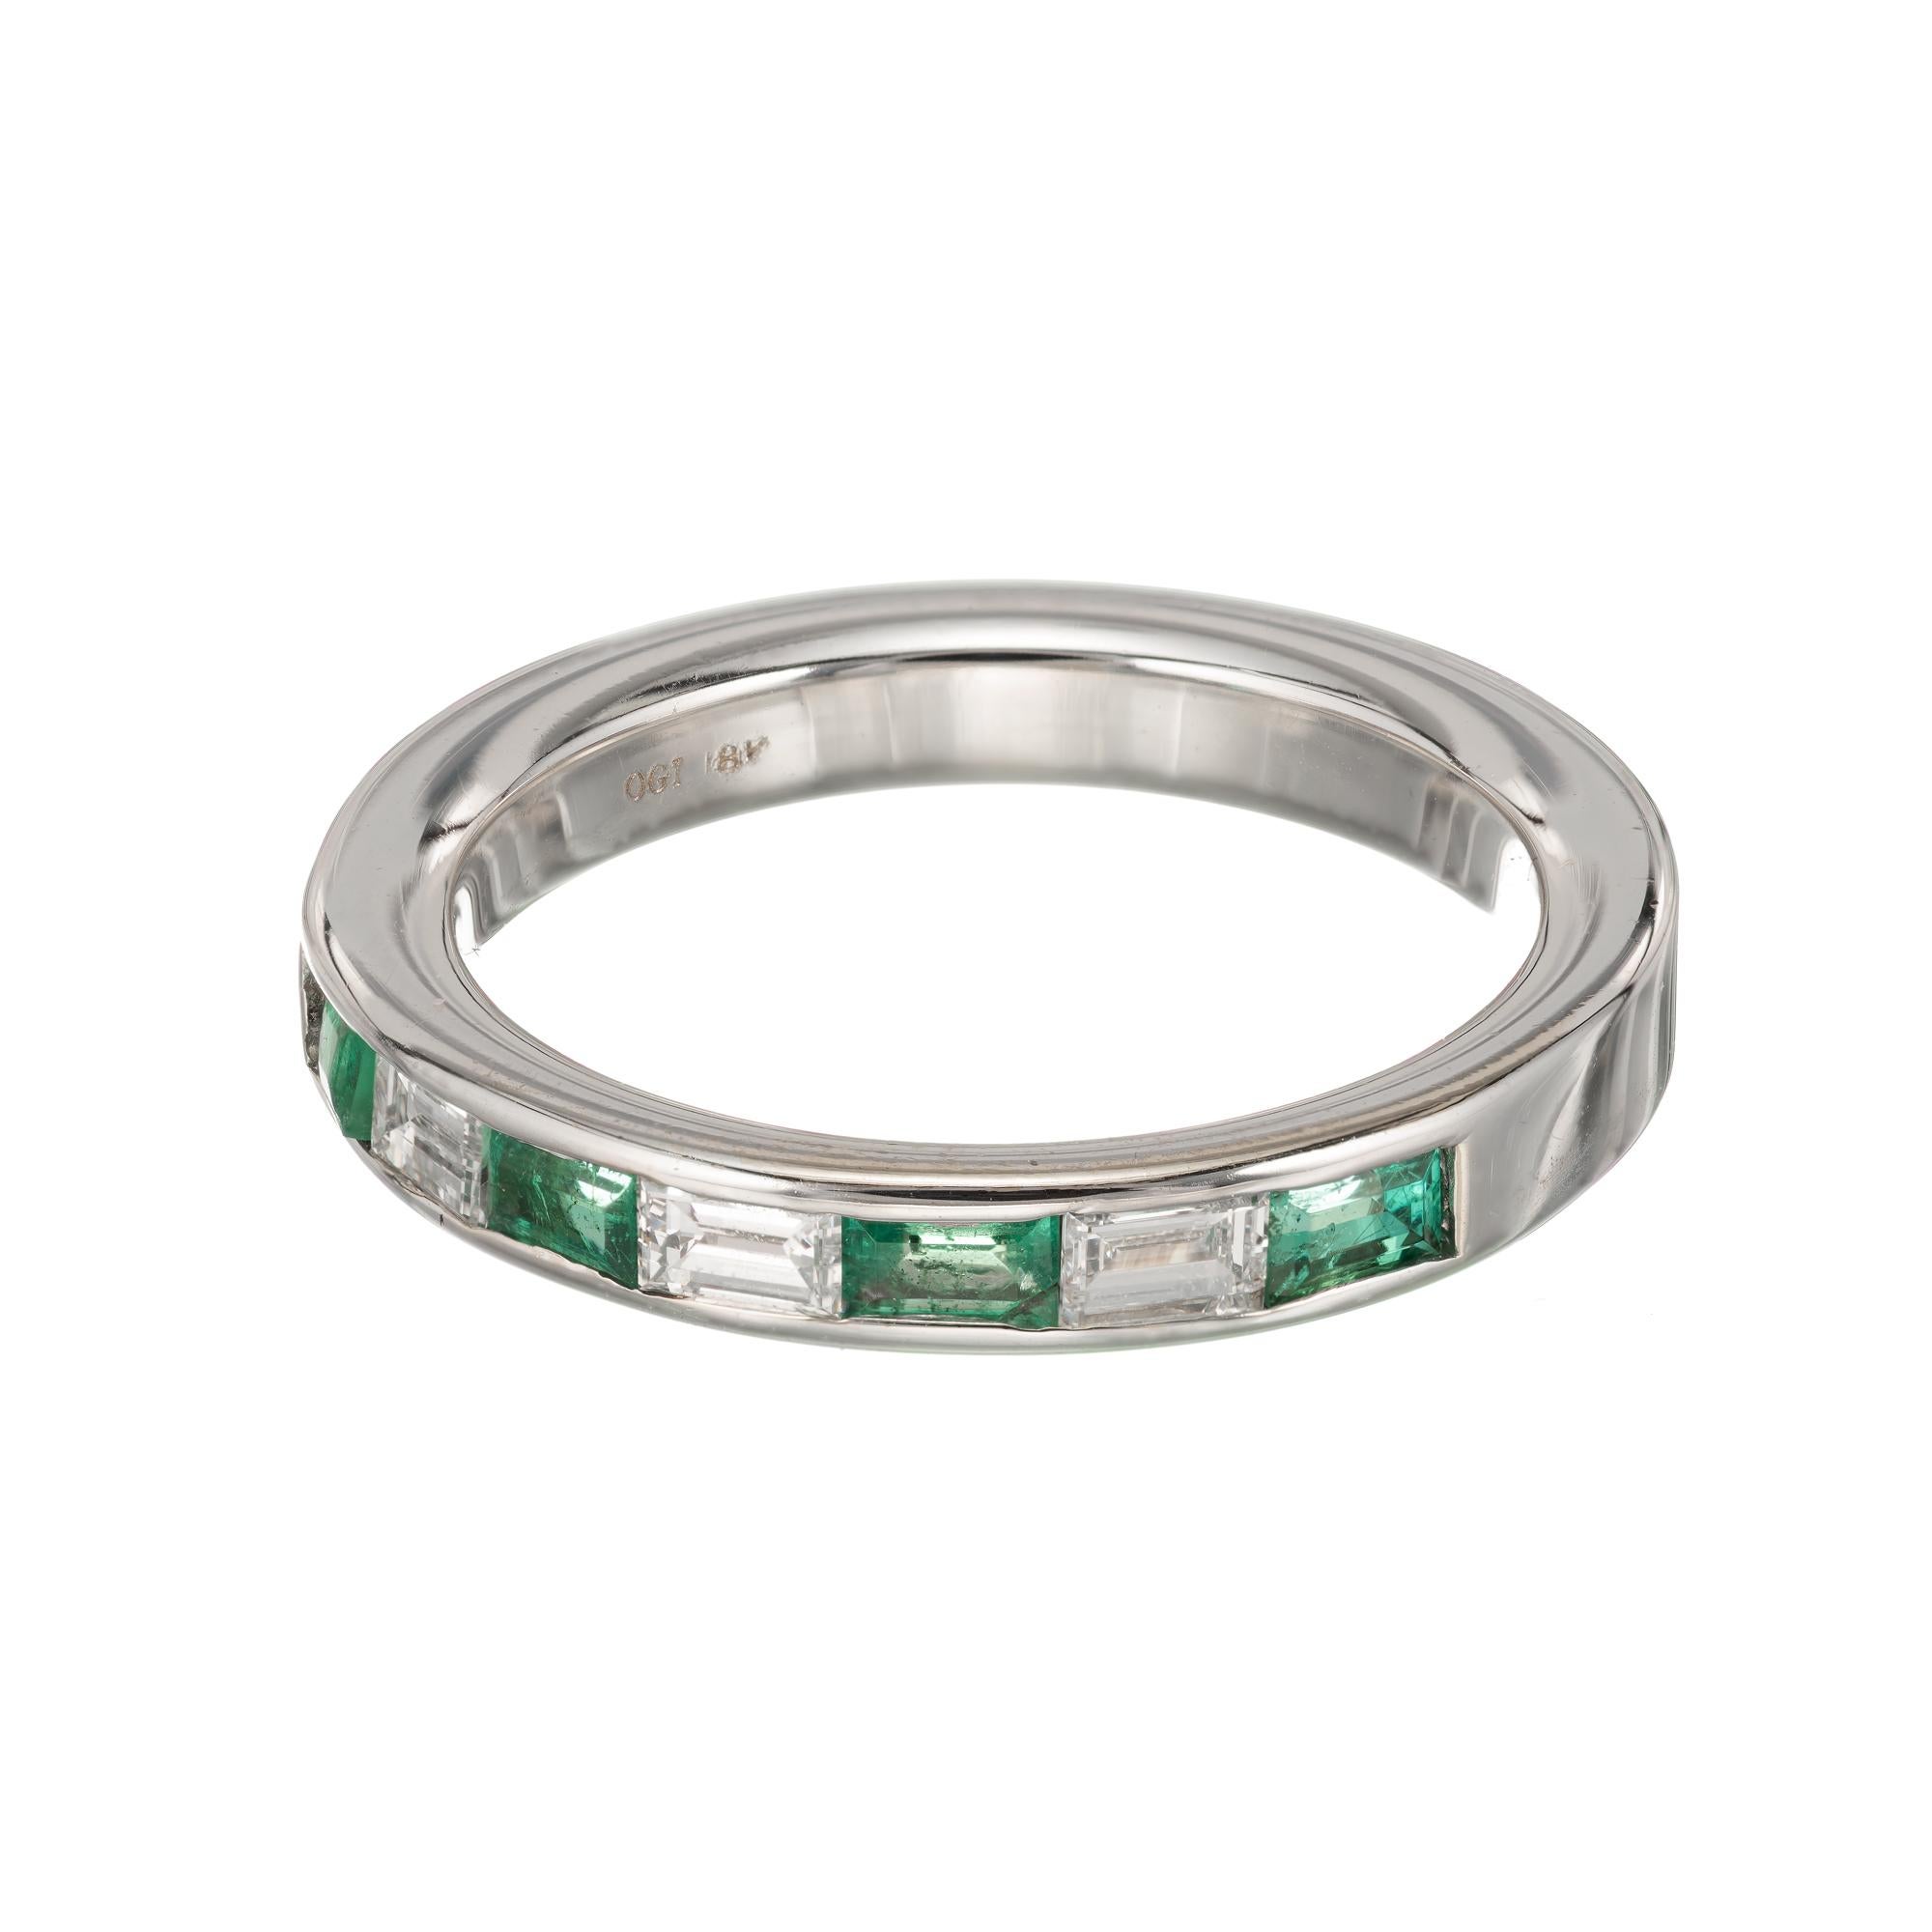  18k white gold wedding band setting with channel set Emeralds and diamonds.

3 baguette cut diamonds, approx. total weight .30cts, F, SI
4 baguette cut bright gem green Emeralds, approx. total weight .25cts, SI
Size 5 and sizable
18k white gold
4.2